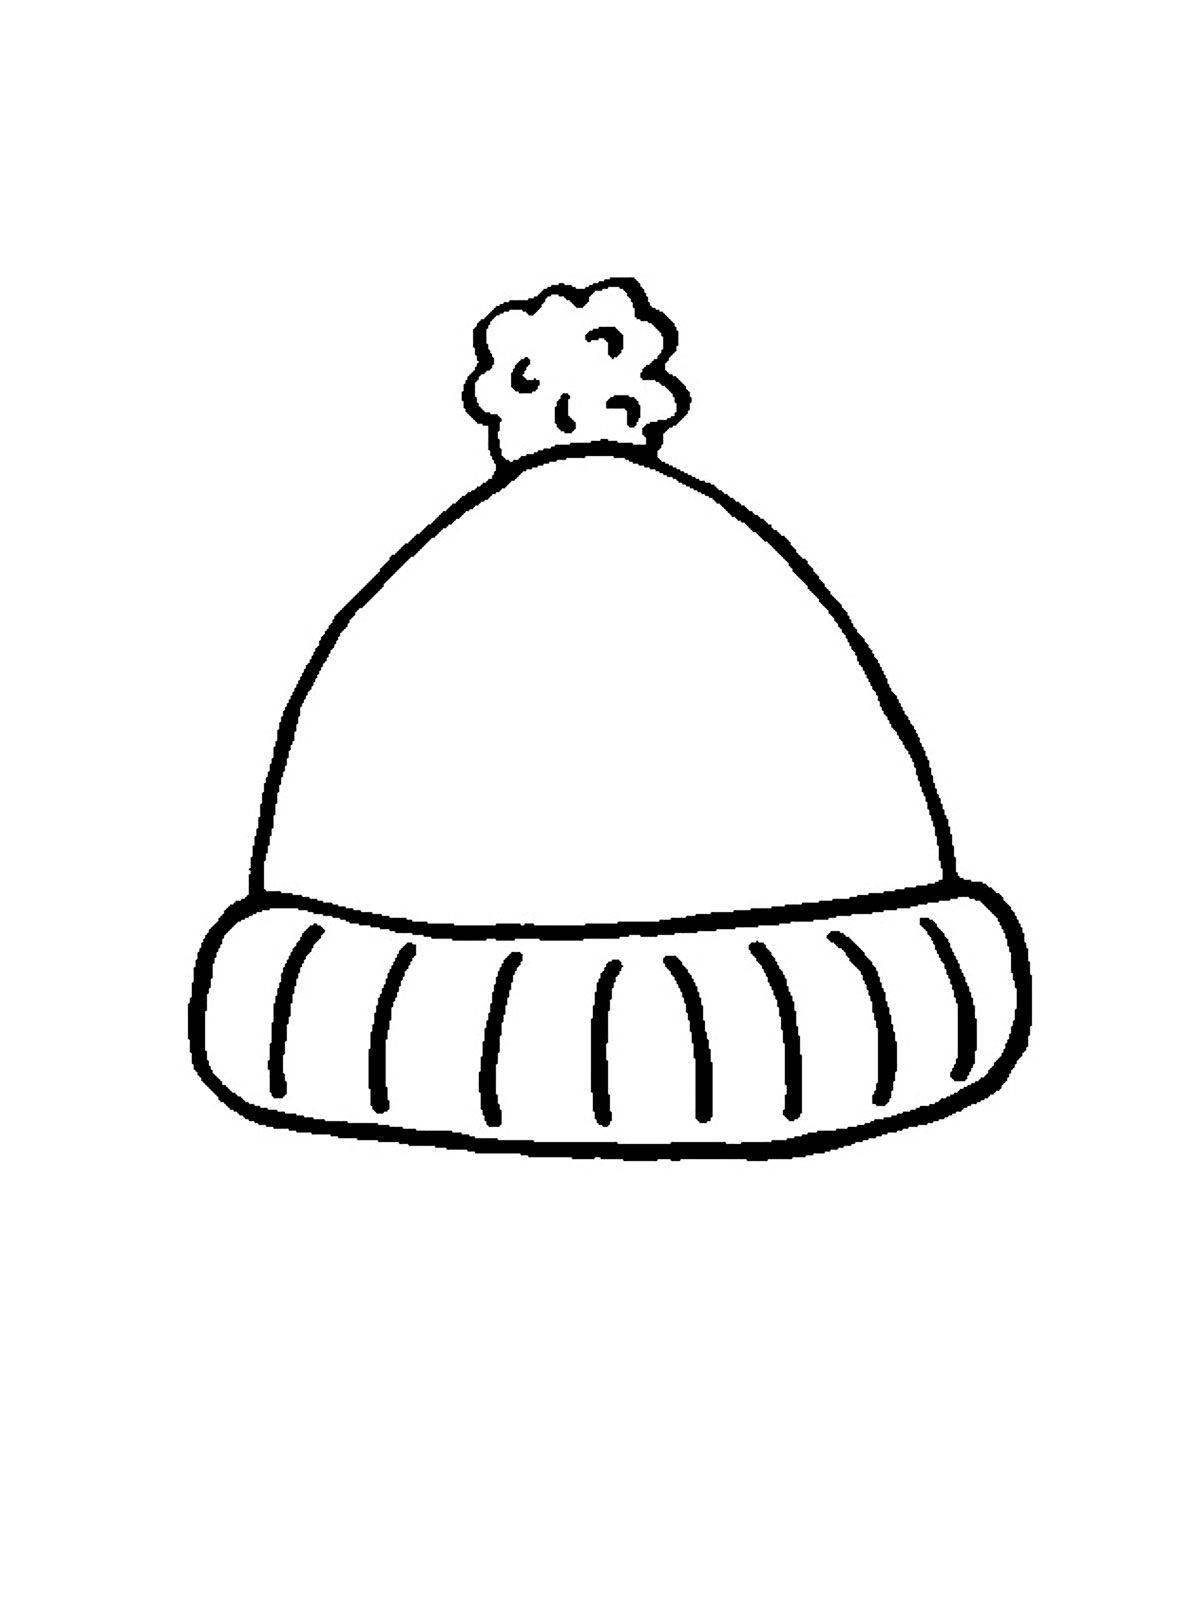 Cute hat and scarf coloring book